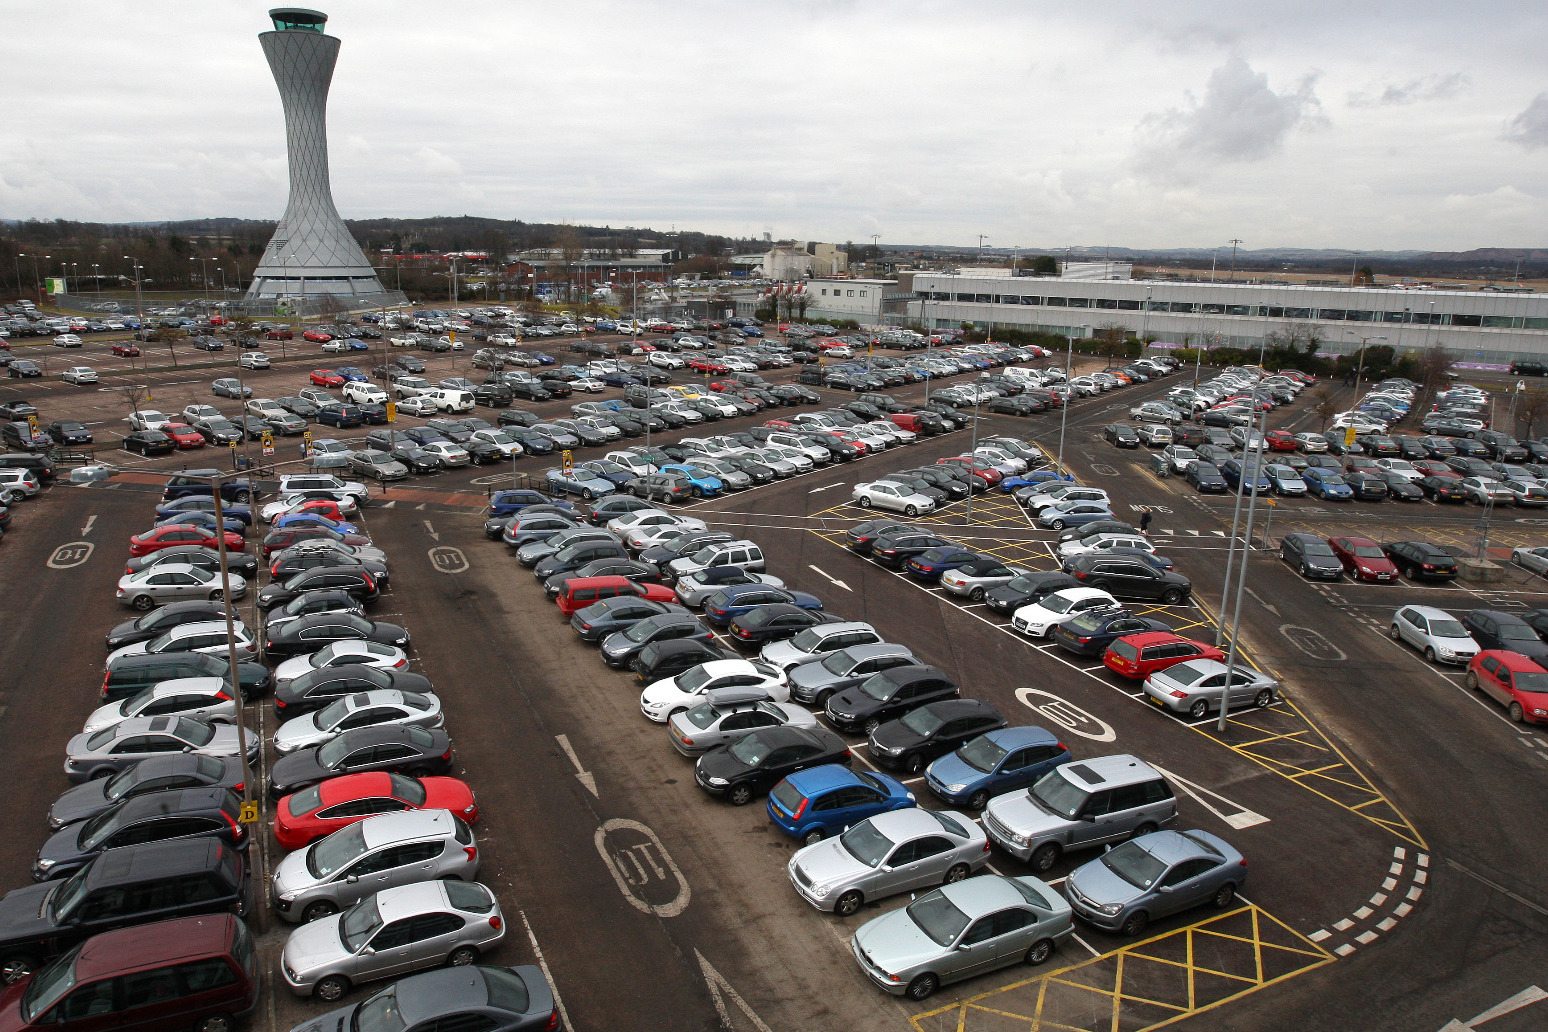 Holidaymakers parking at airports warned over ‘serious financial sting’ 